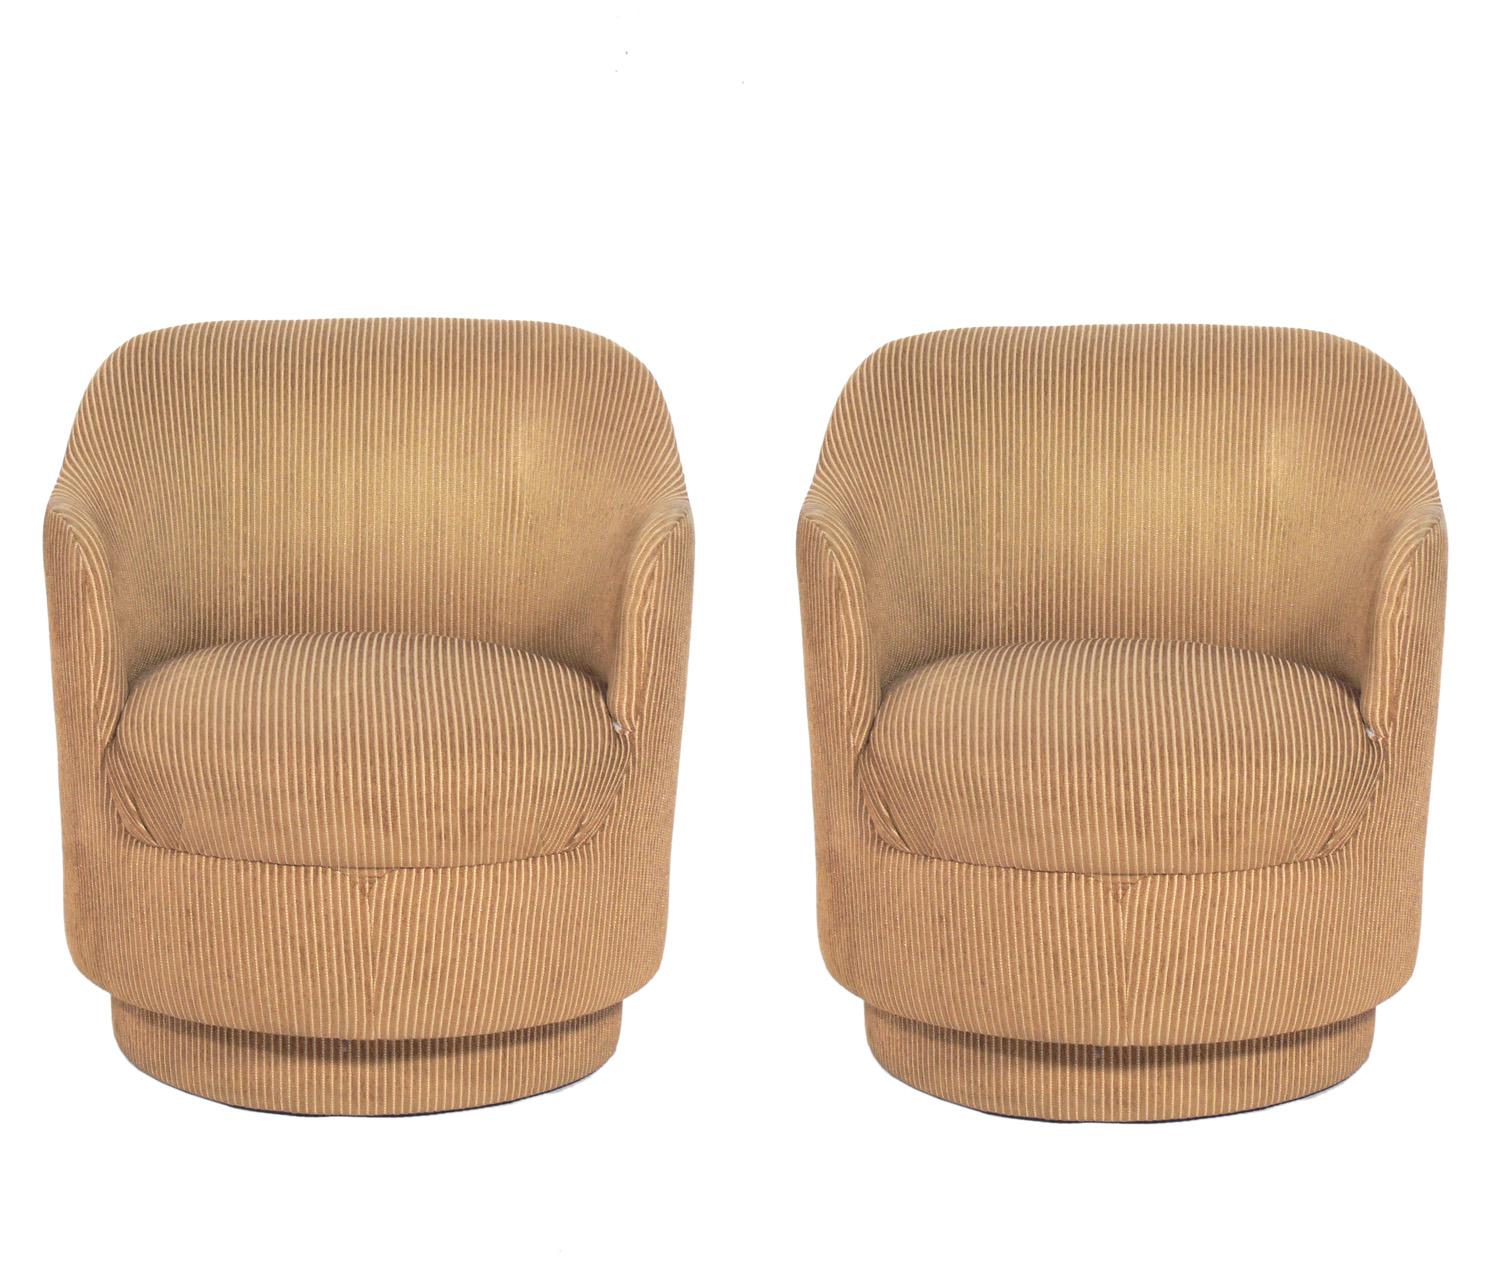 Pair of curvaceous swivel lounge chairs, in the manner of Karl Springer, American, circa 1960s. These chairs are currently being reupholstered and can be completed in your fabric. The price noted below INCLUDES reupholstery in your fabric.